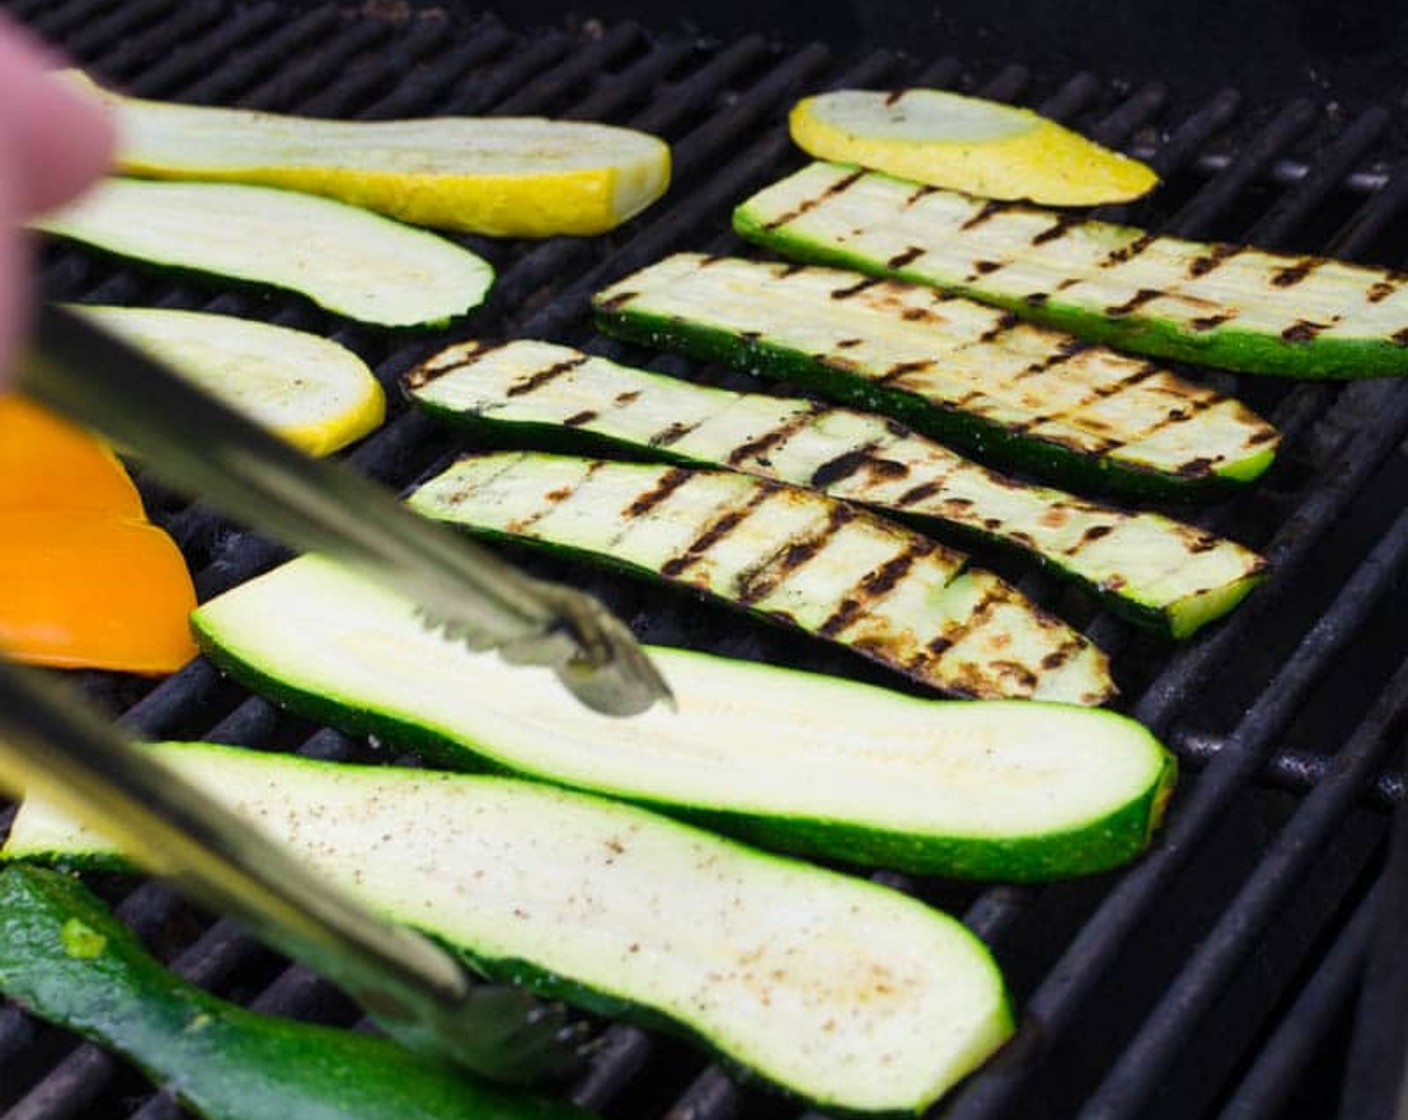 step 5 Place the vegetables on the grill and cook for 2-3 minutes on the first side before flipping them and grilling for an additional 2 minutes on the other side. Transfer the grilled vegetables to a sheet pan to rest.